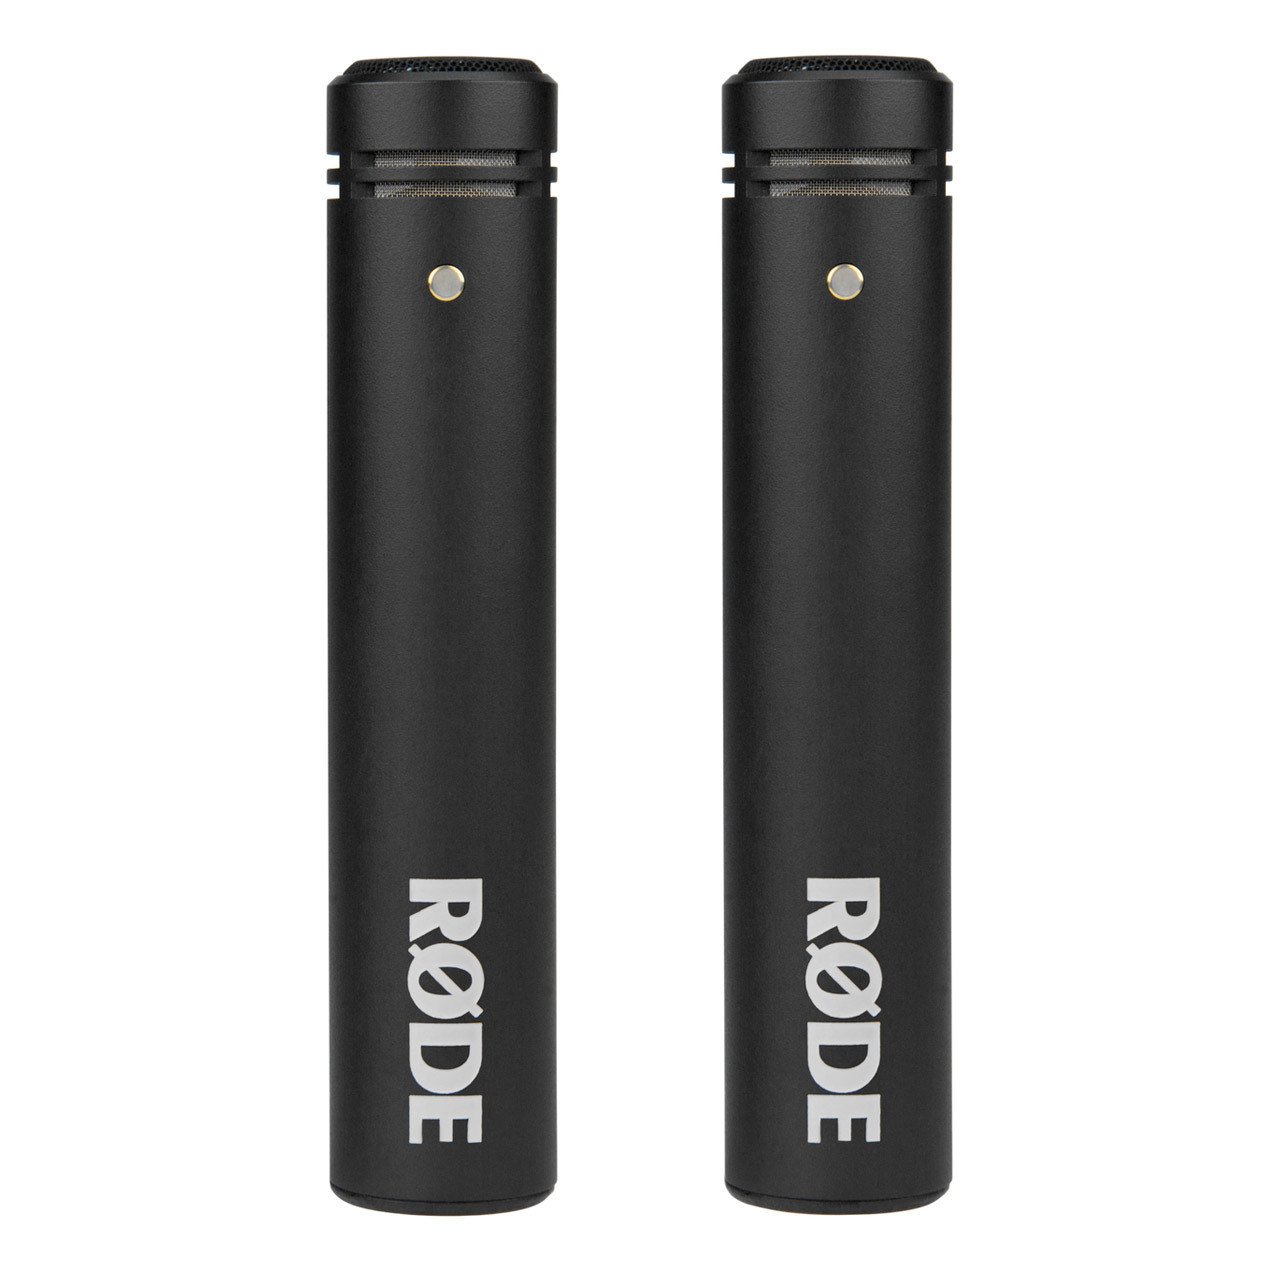 Condenser Microphones - RODE M5 Matched Pair Compact 1/2" Condenser Microphones